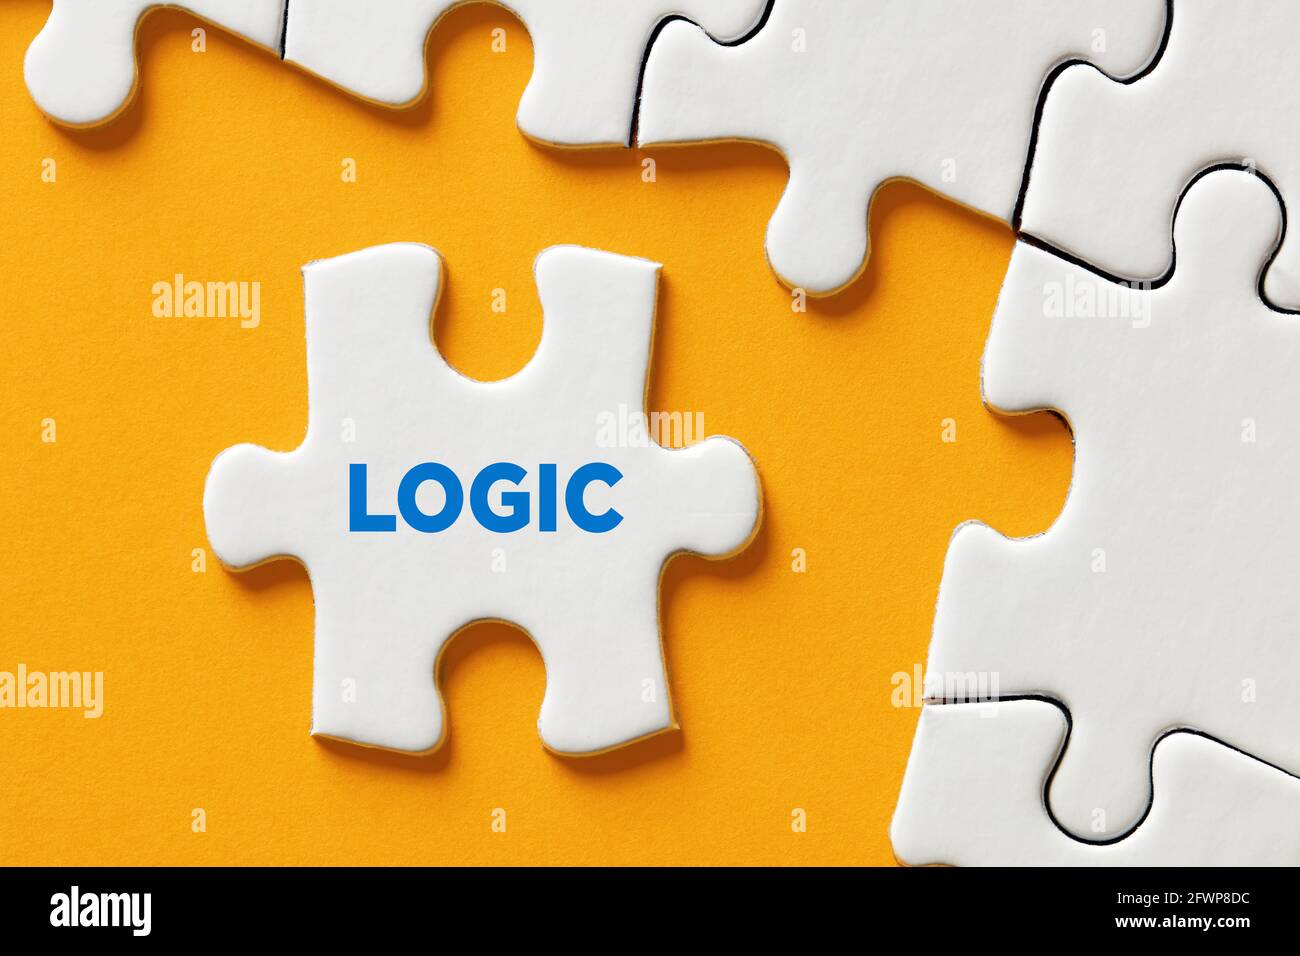 The word logic on a puzzle piece apart form the assembled pieces. Logical thinking, problem solving, cognition or attitude concept. Stock Photo